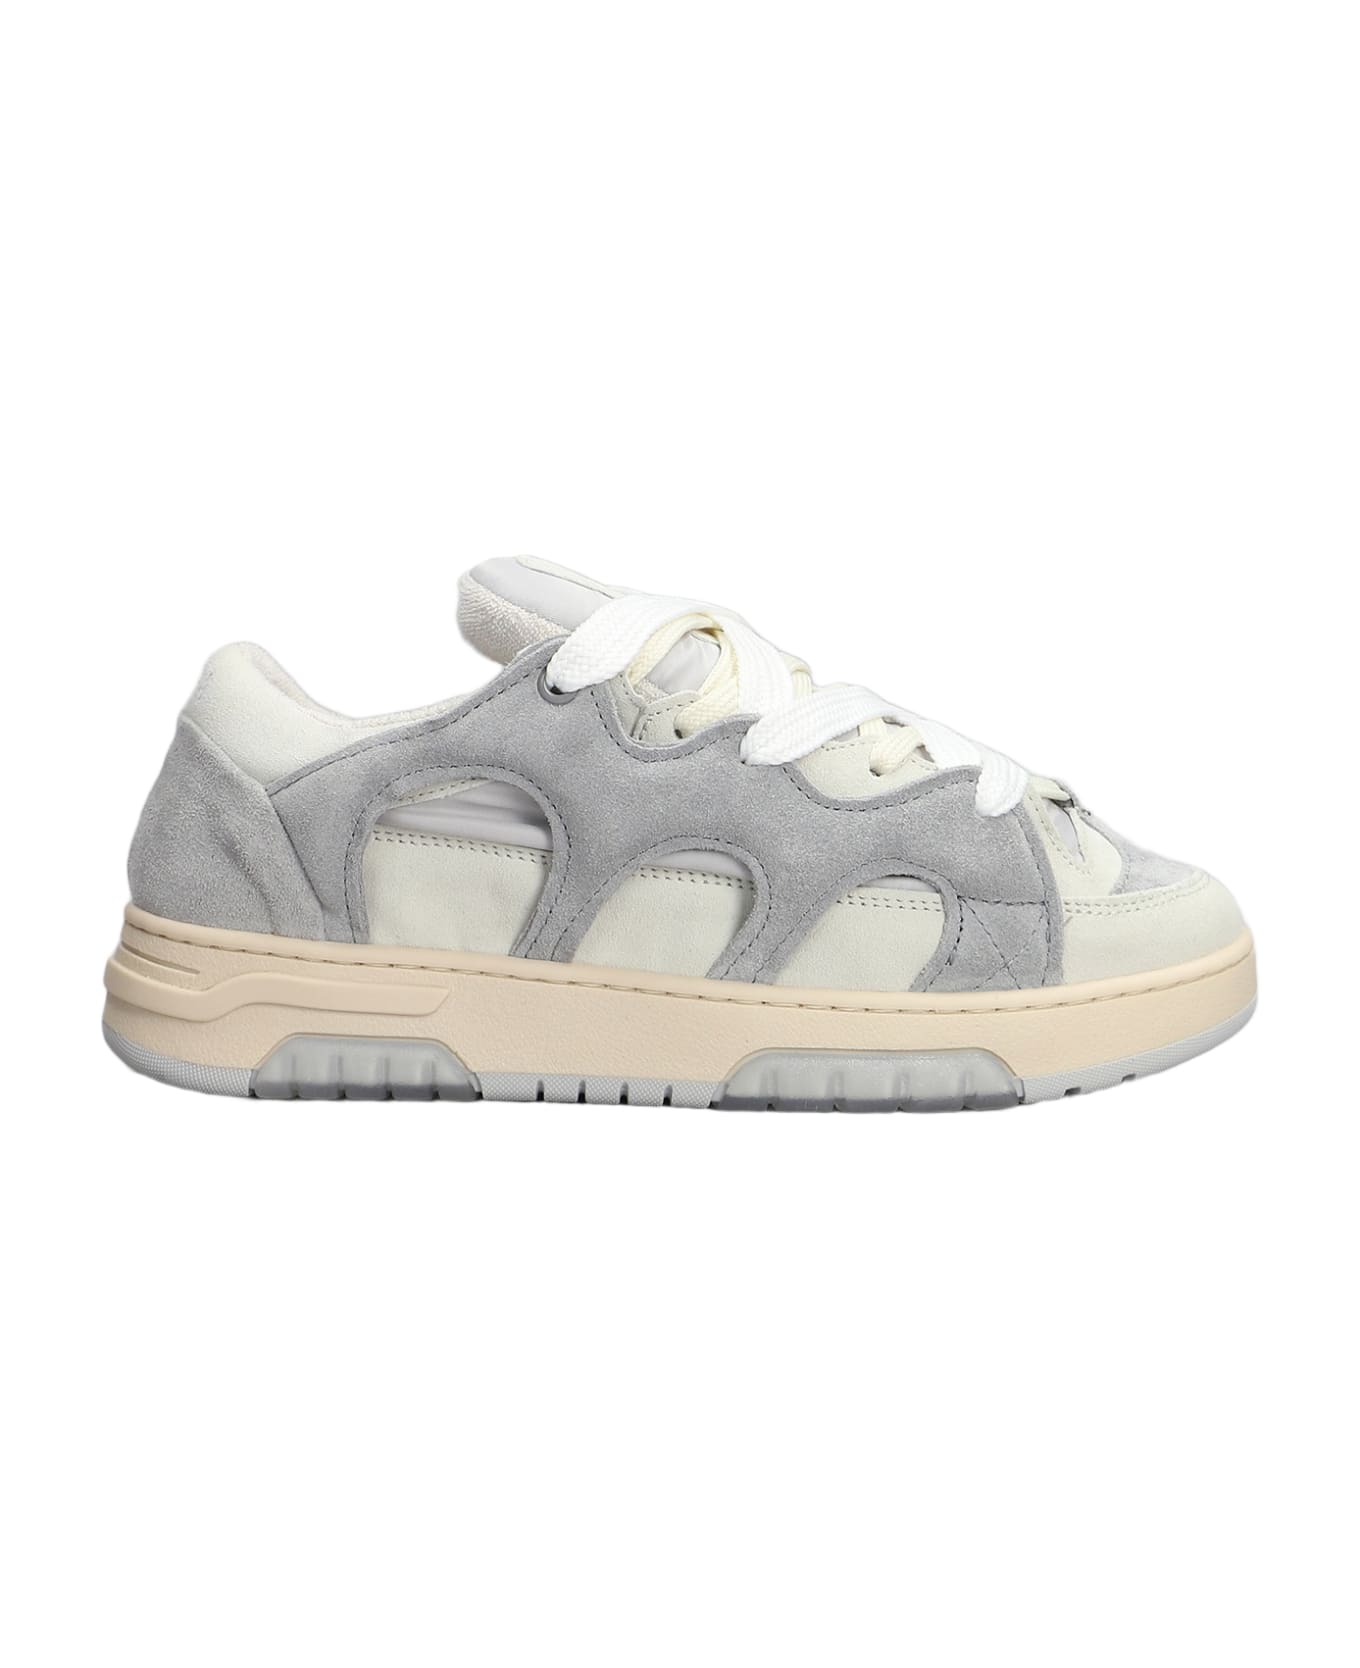 Paura Santha 1 Sneakers In Grey Suede And Fabric - grey